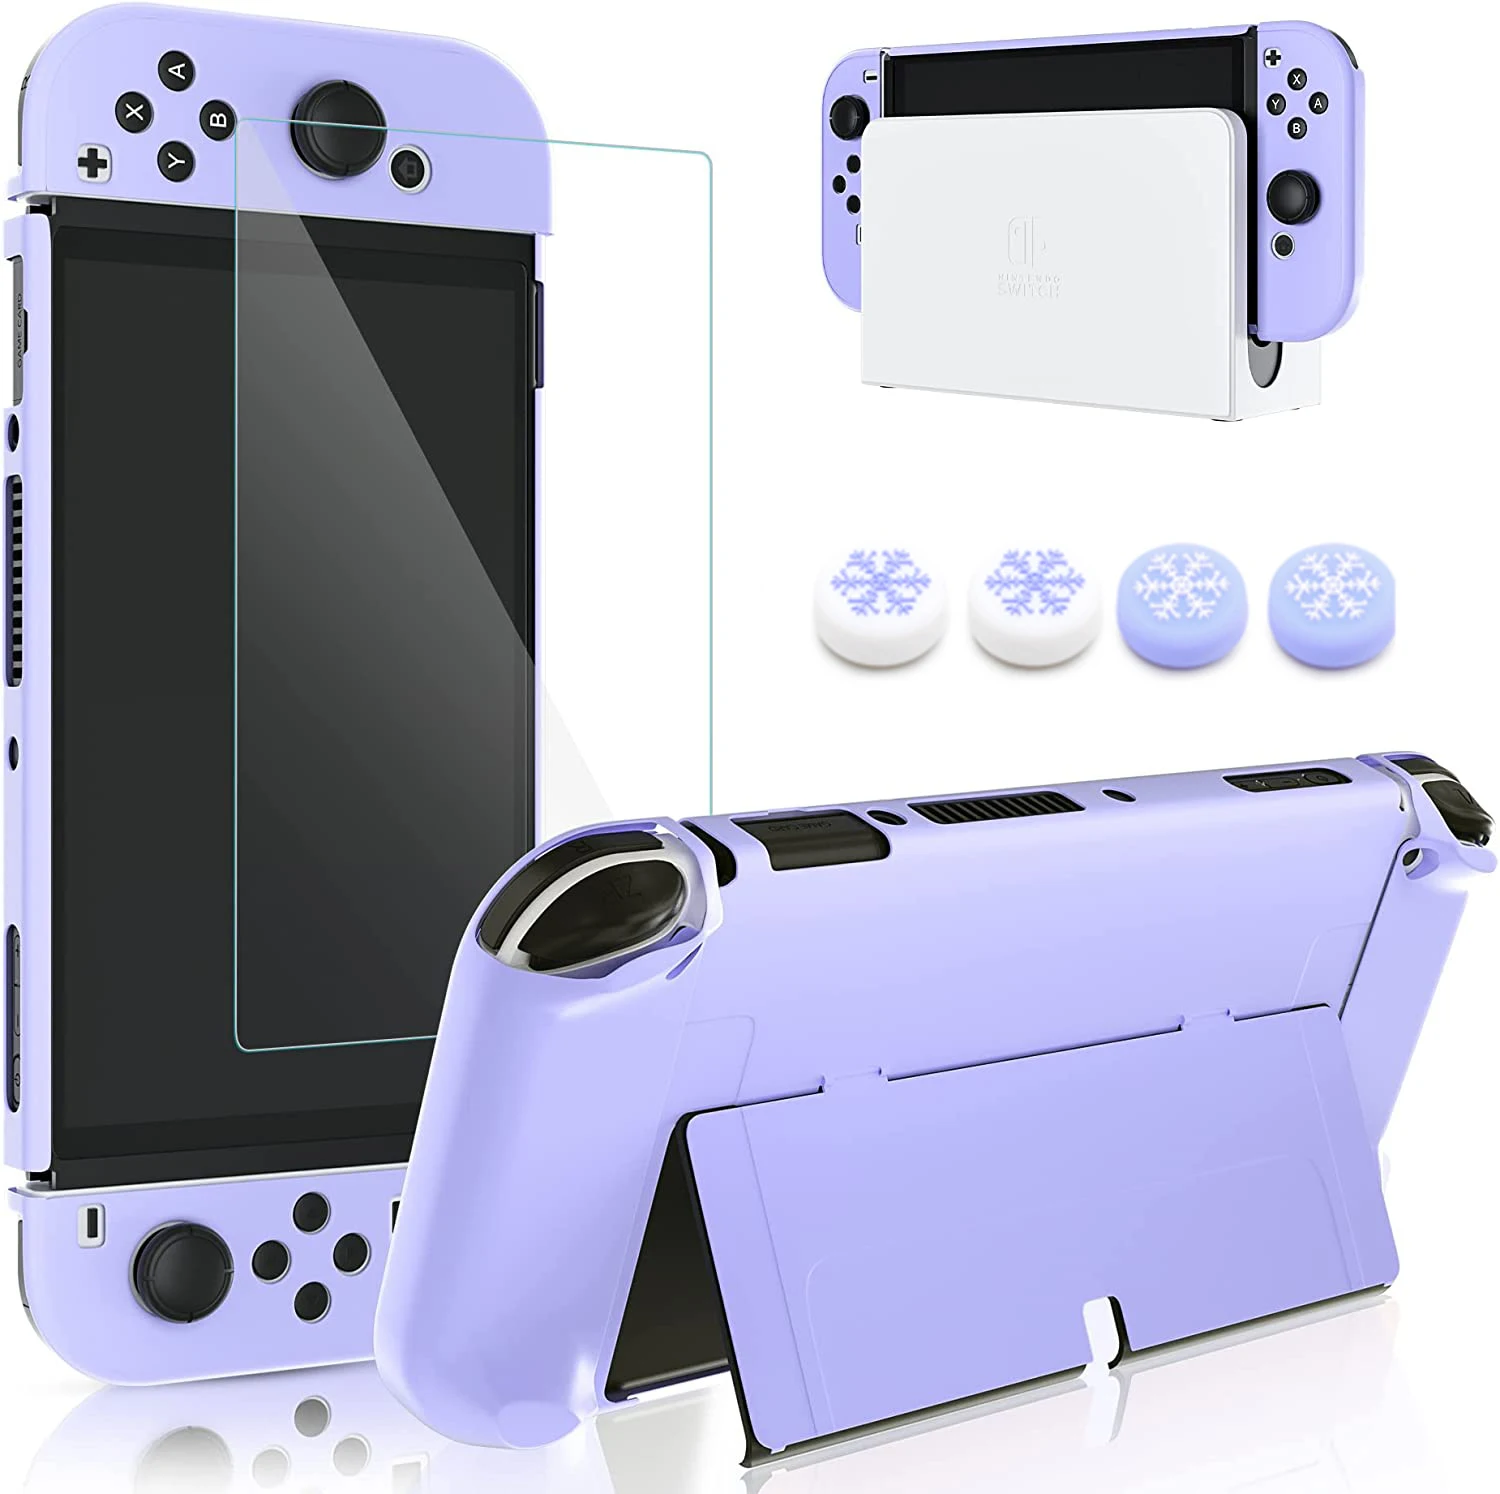 

Hard Shell Protective Cover Case Accessories Kit Ns Joycon Housing Skin Pouch Box With 4 PCS Thumb Caps For Nintendo Switch Oled